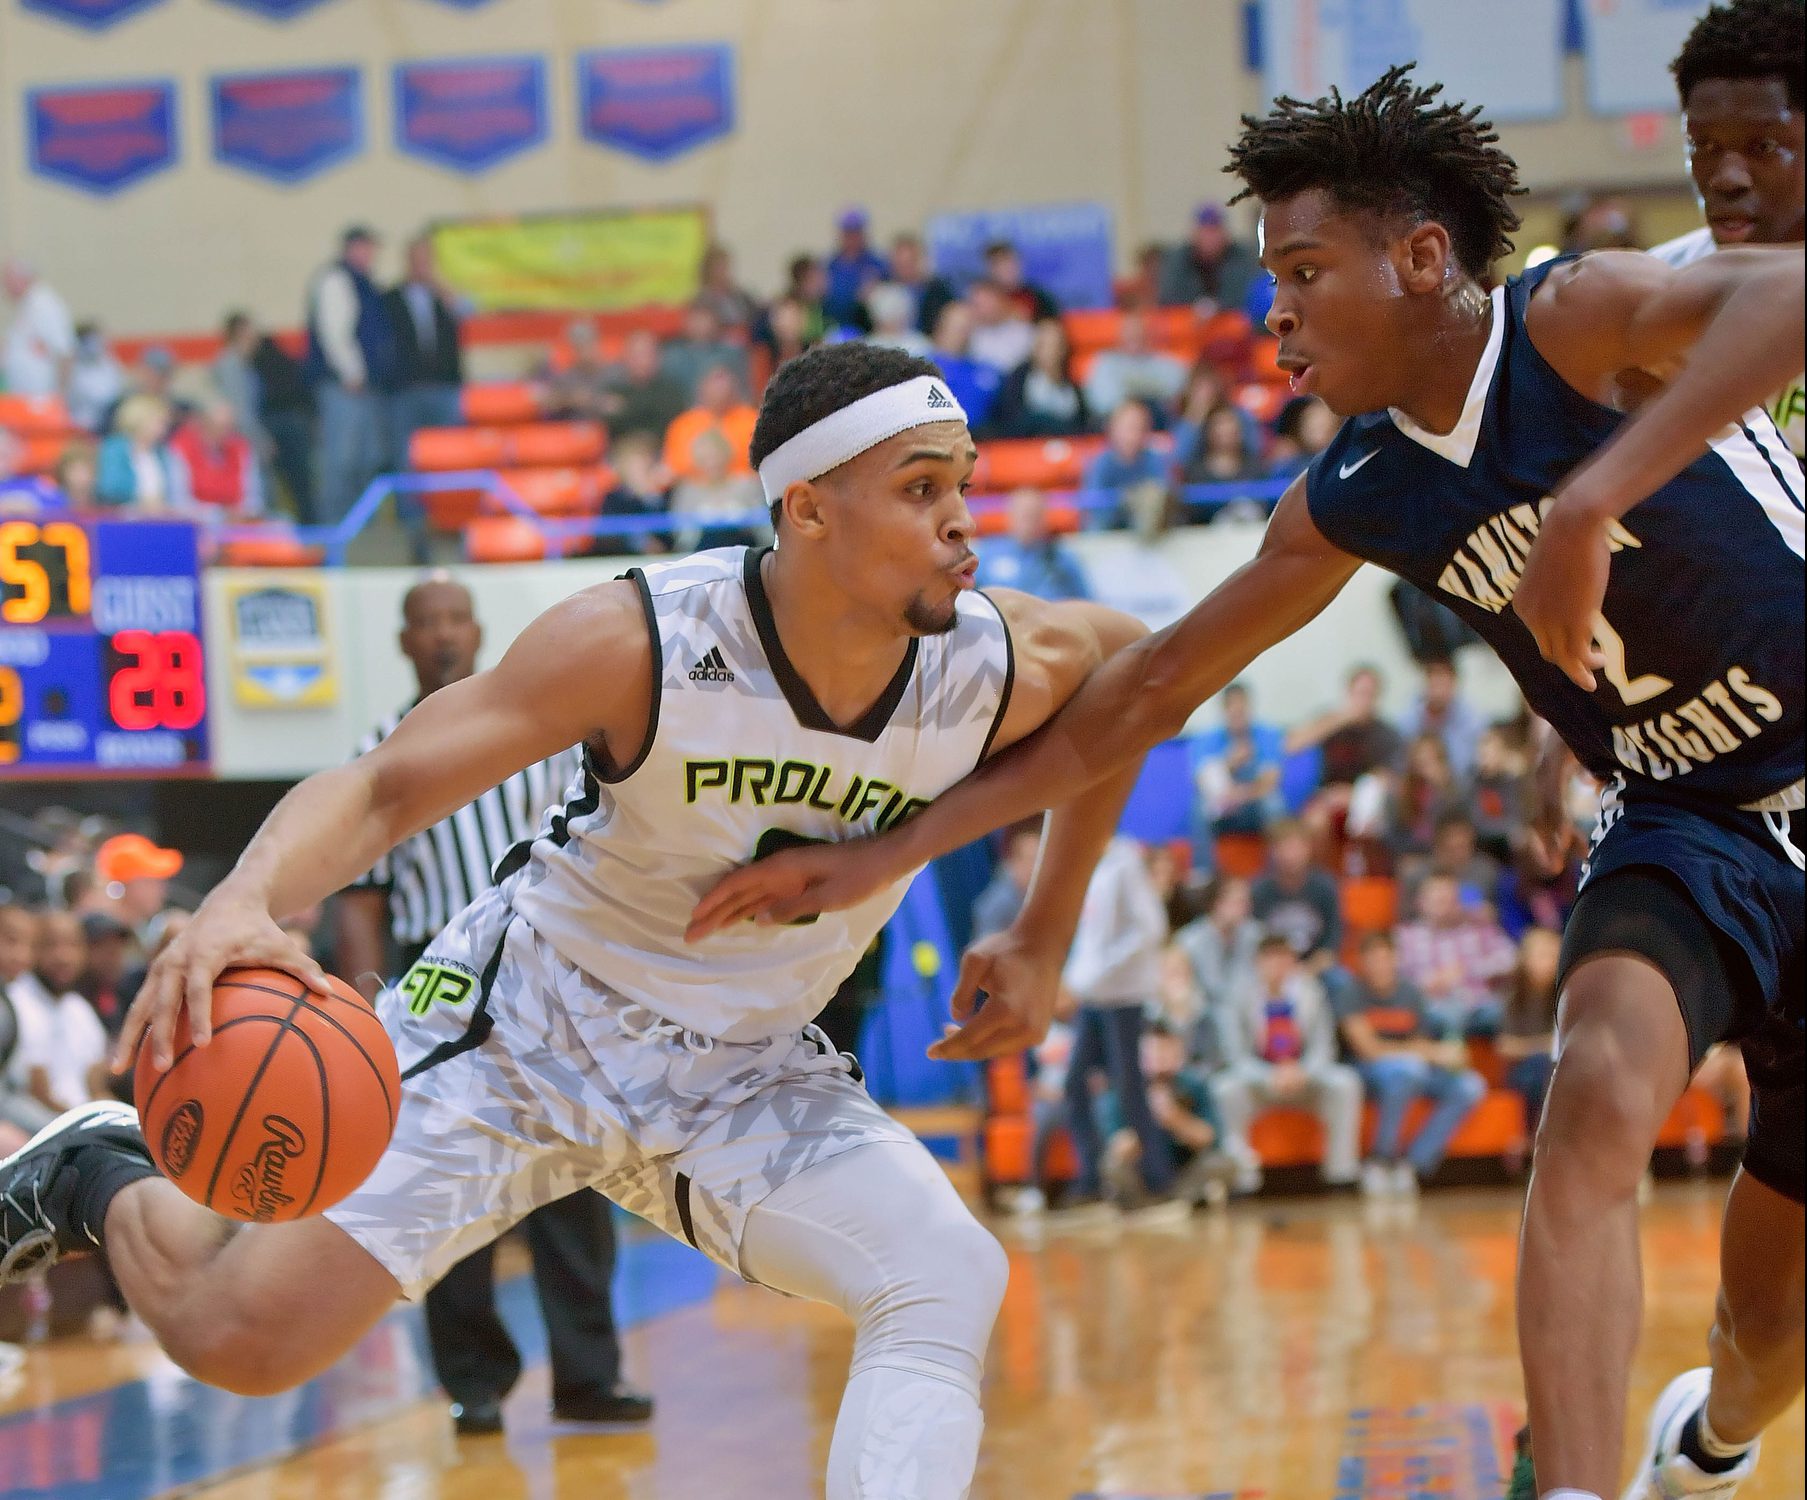 Dec 2, 2016; Paducah, KY, U.S.A: Prolific Prep Gary Trent Jr (2) drives against Hamilton Heights Christian guard Shai Gilgeous-Alexander during the Marshall County Hoopfest that brings several top high school basketball teams together. Mandatory Credit: Jim Brown-USA TODAY Sports. ORG XMIT: US 135777 Hoopfest 12/2/2016 [Via MerlinFTP Drop]